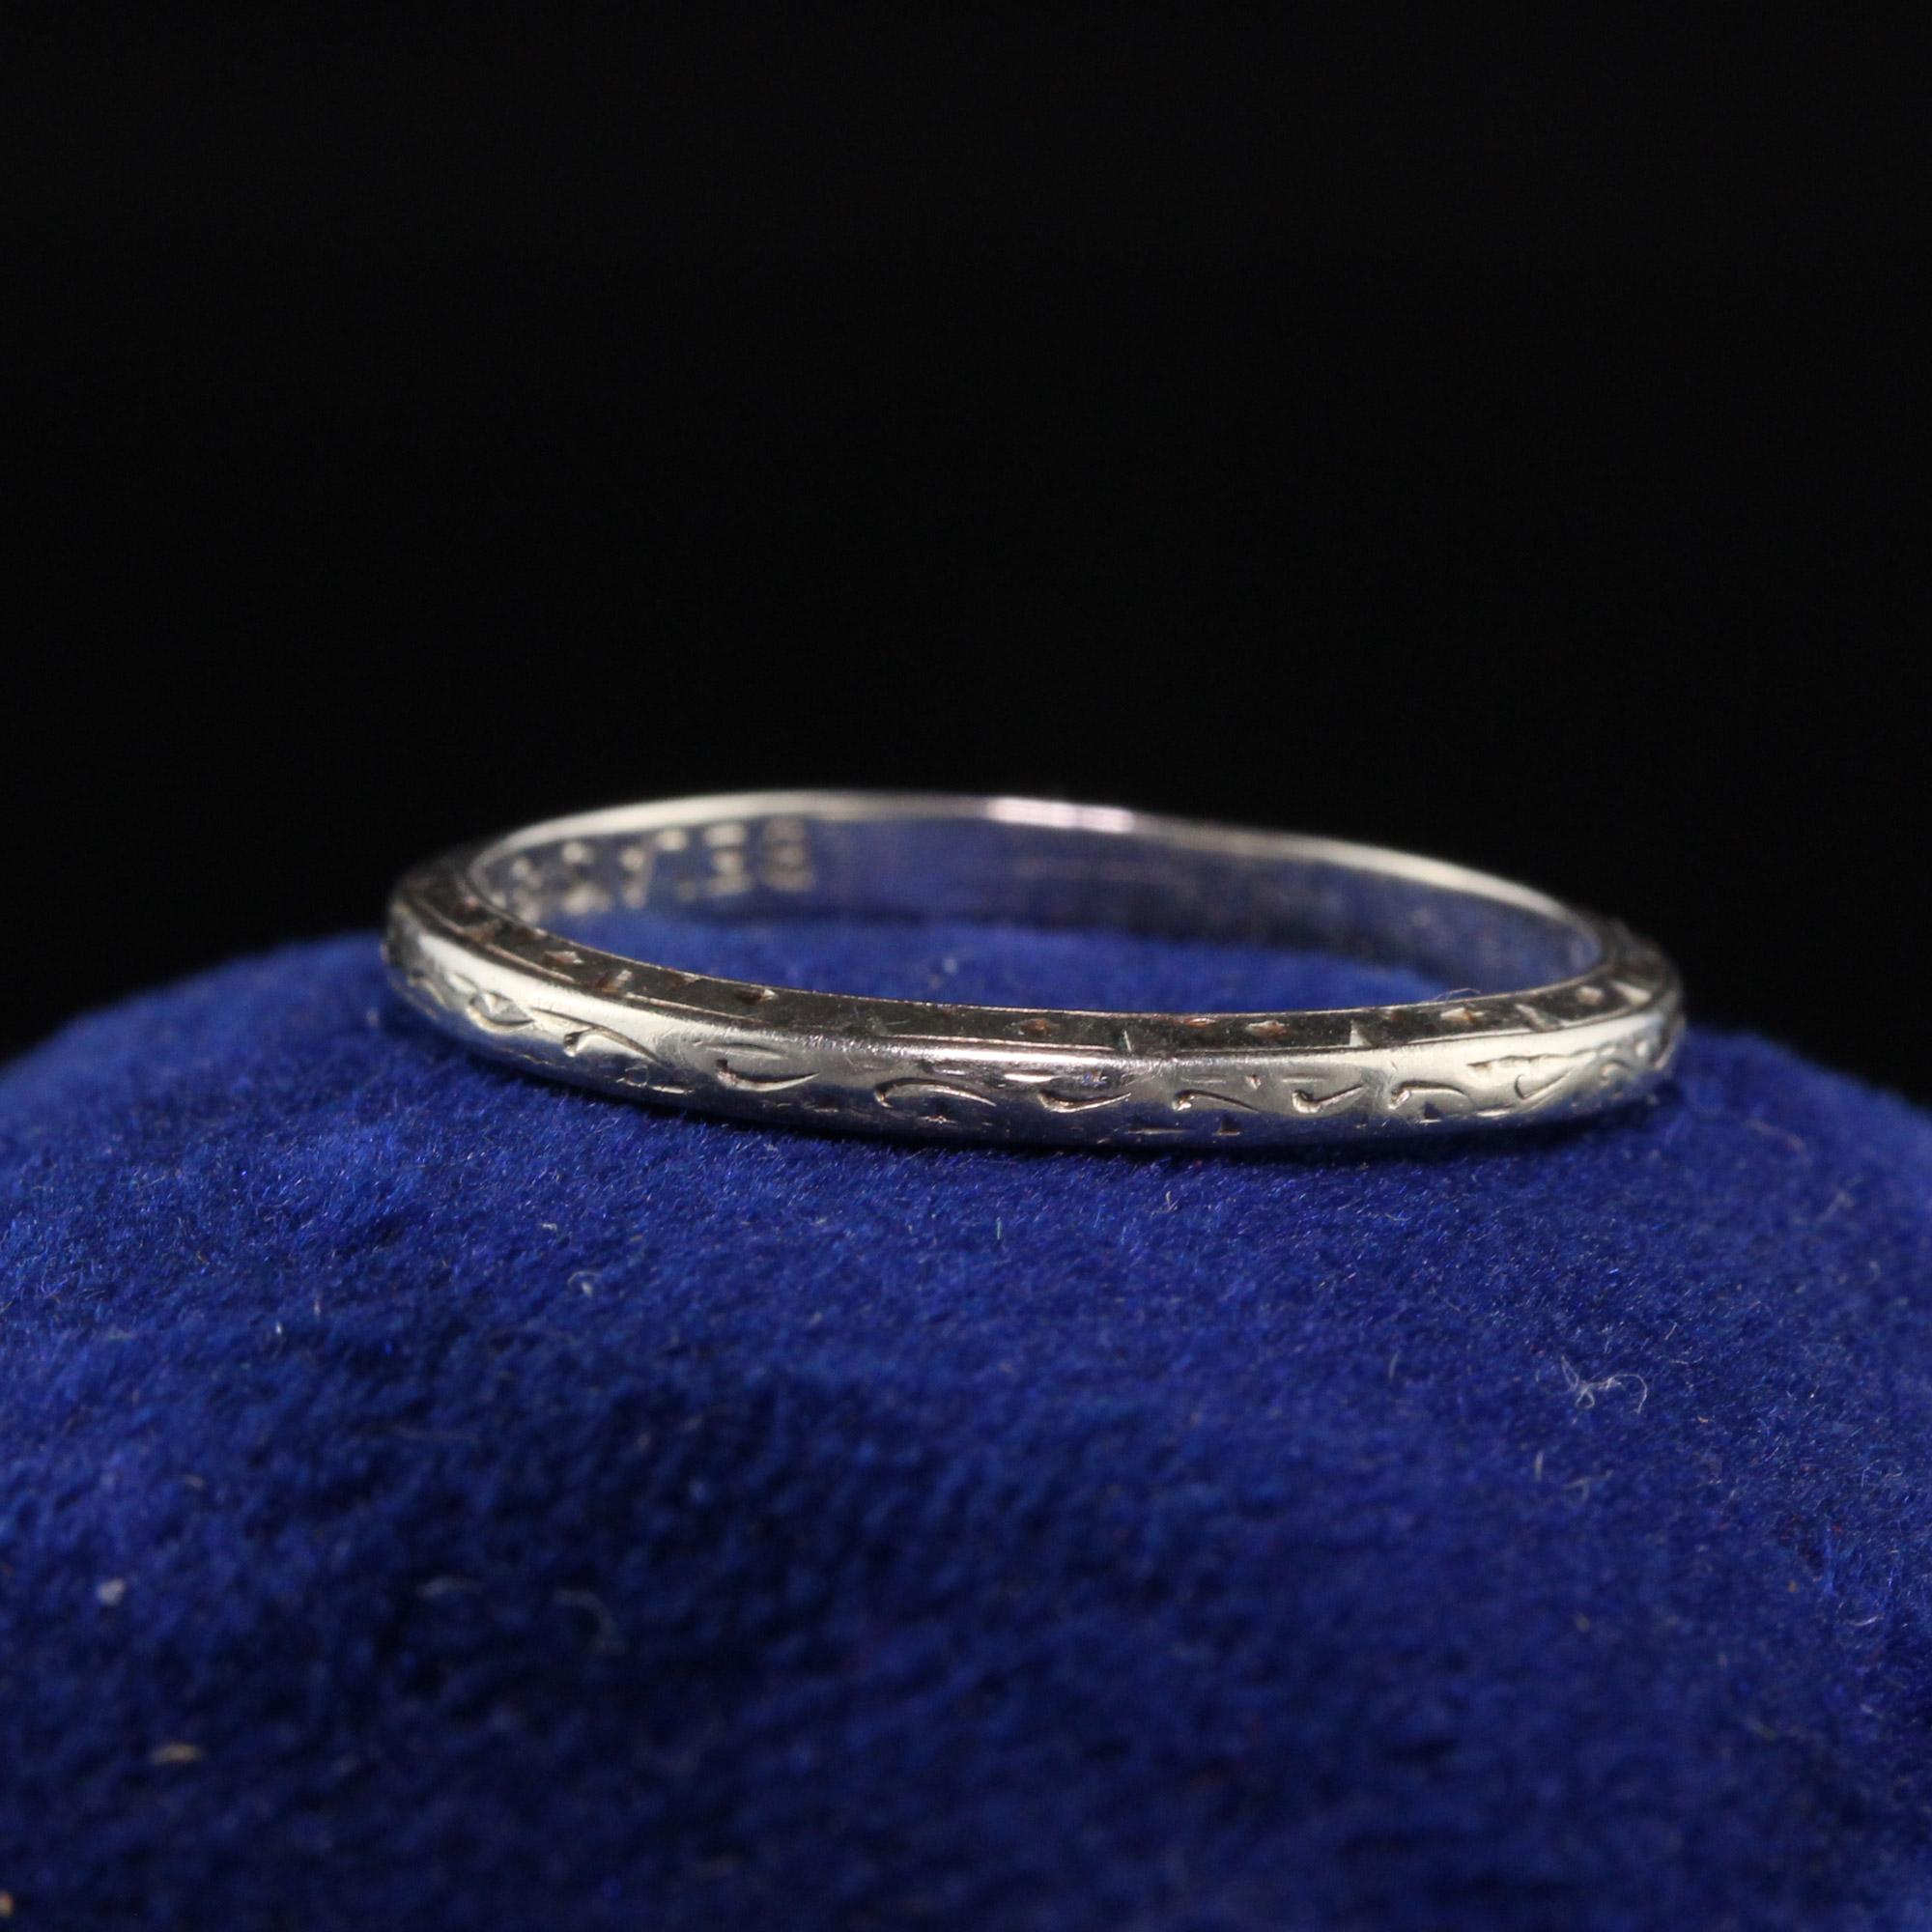 Beautiful Antique Art Deco Belais 18K White Gold Engraved Wedding Band. This gorgeous wedding band is crafted 18k white gold. The ring is engraved all around and is stamped 18k Belais inside the band.

Item #R1338

Metal: 18K White Gold

Weight: 1.5